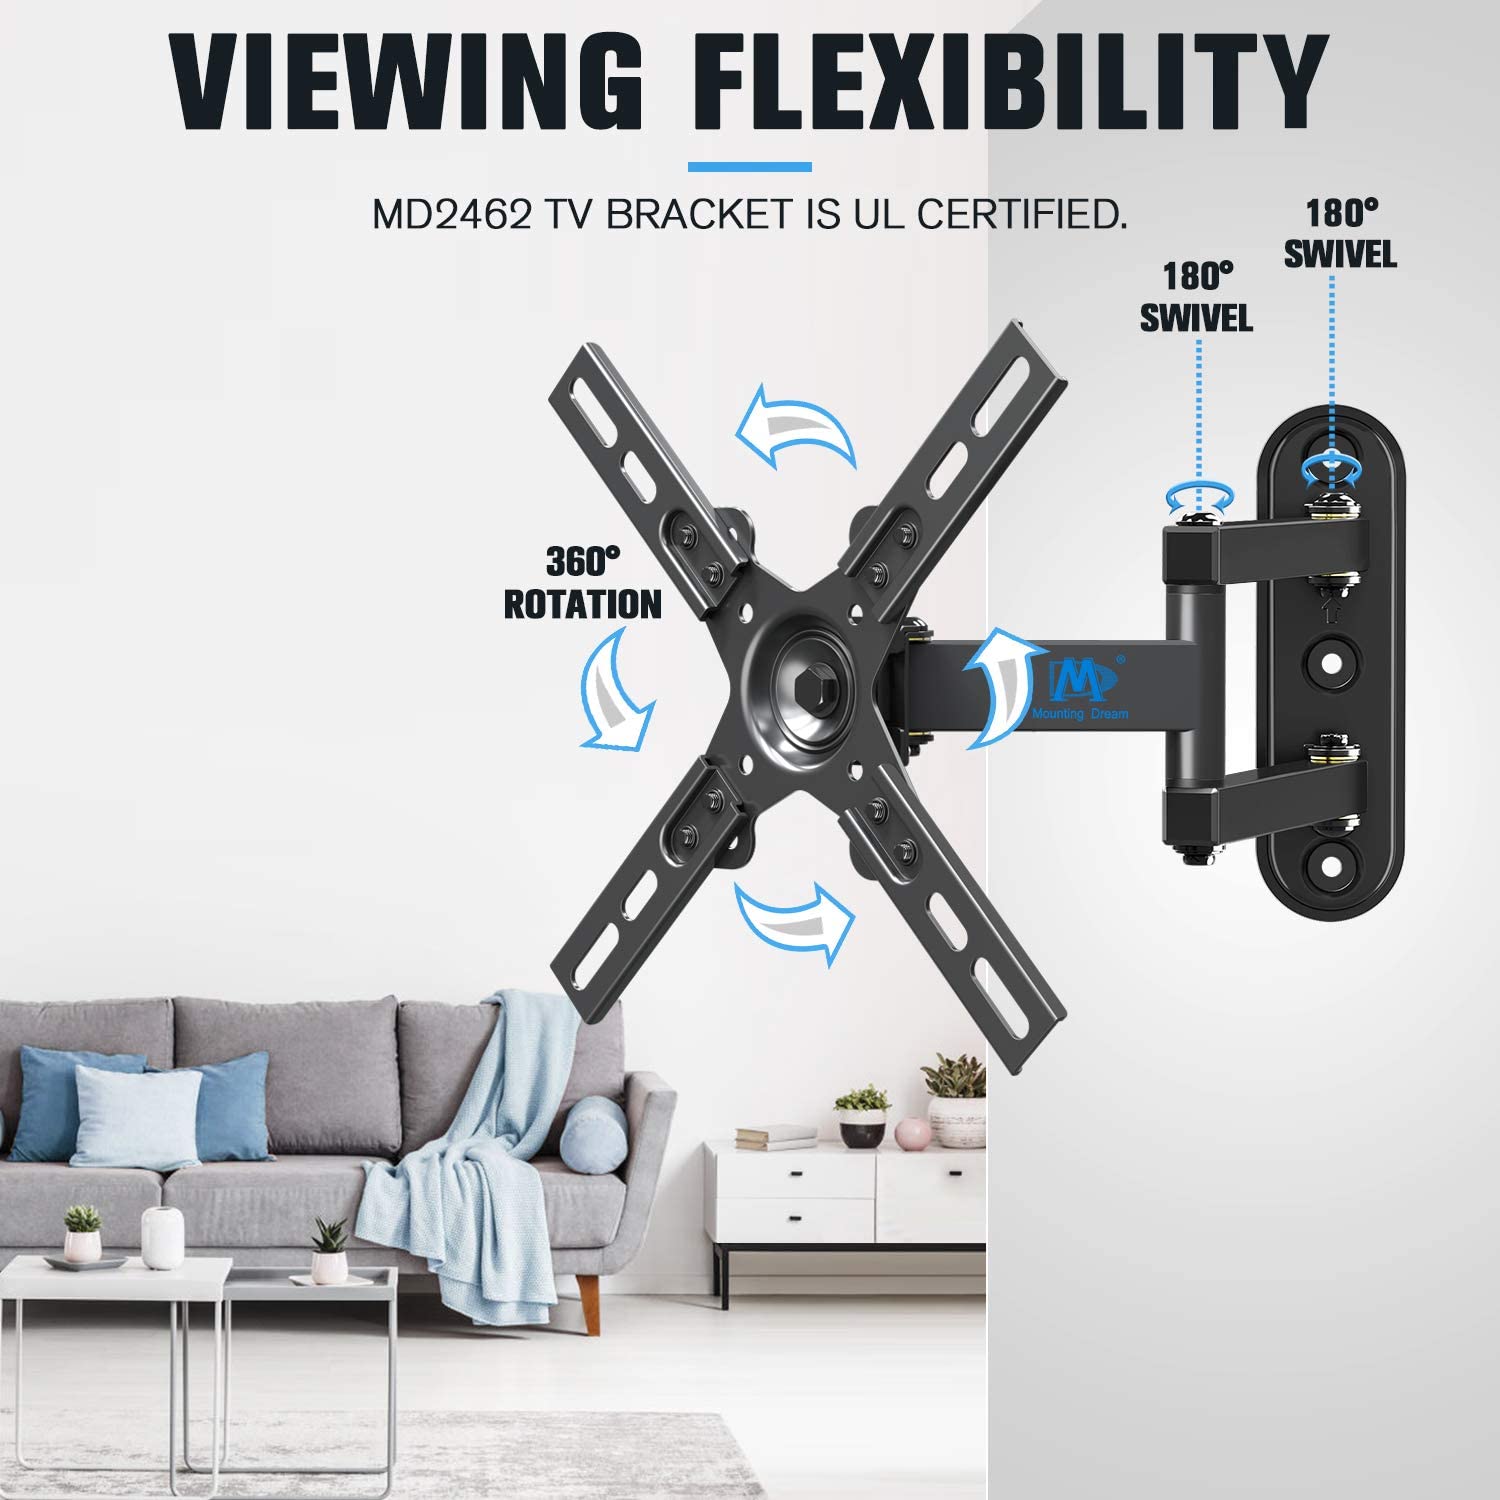 ul certificated tv mount with 360° rotation and 180° swivel to have a comfortable and flexible view 